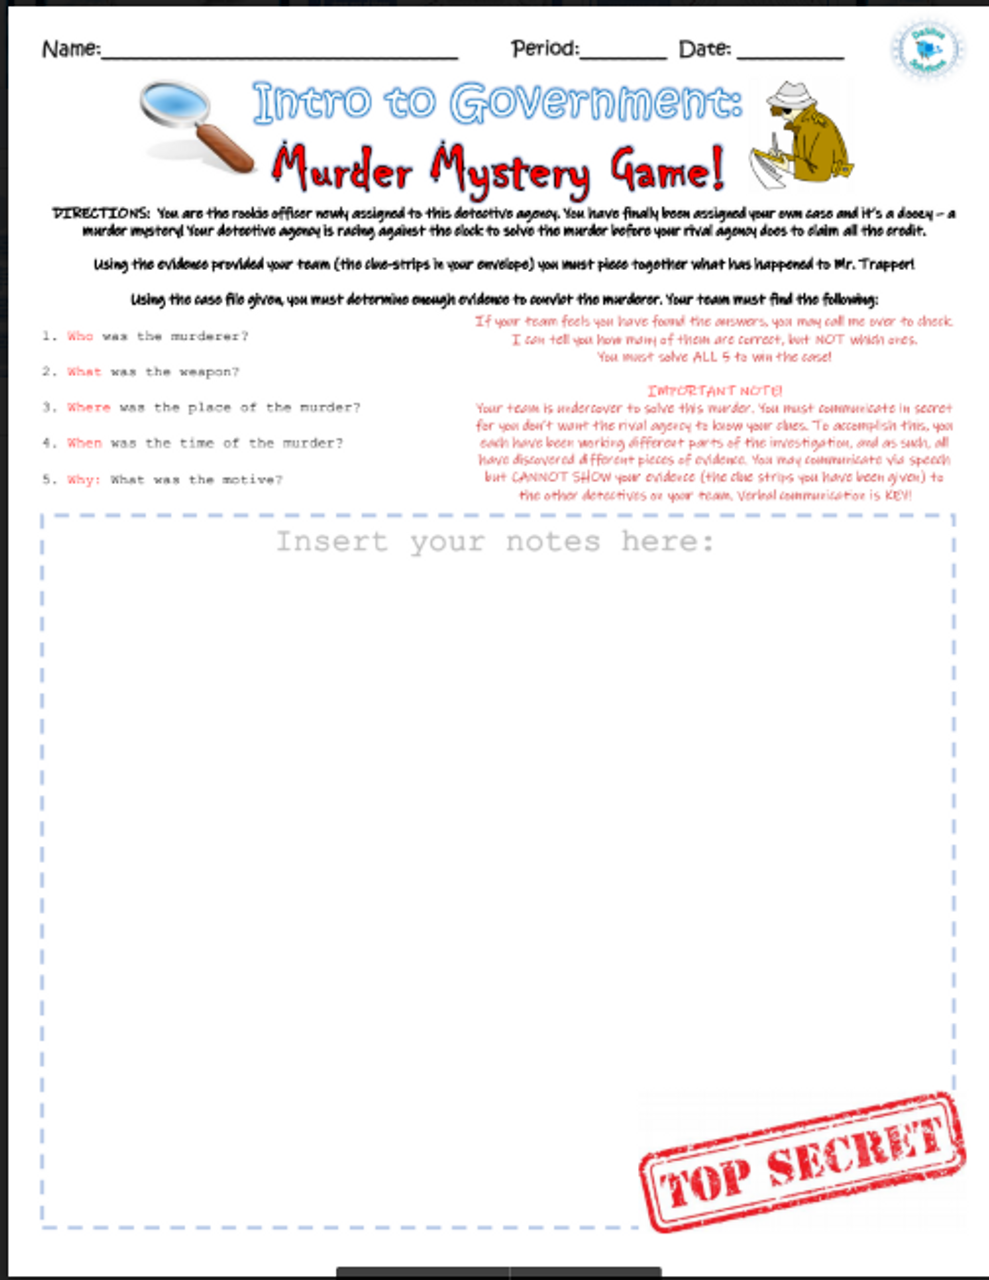 Introduction to Government: Murder Mystery Game